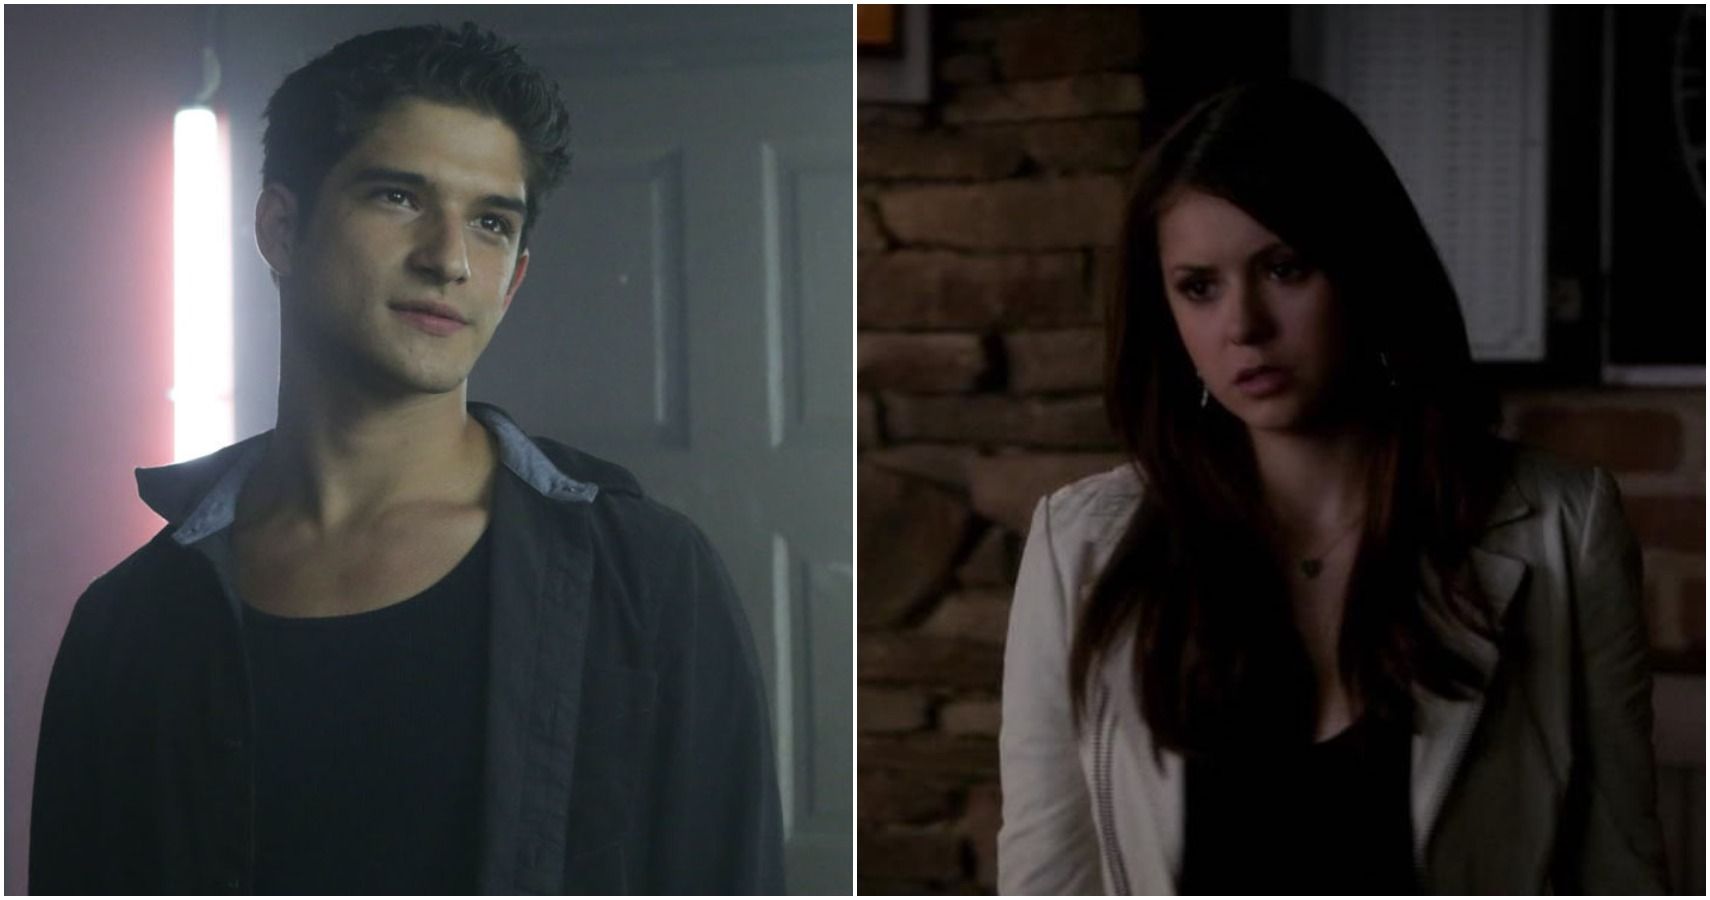 From The Vampire Diaries' Mystic Falls To Teen Wolf's Beacon Hill